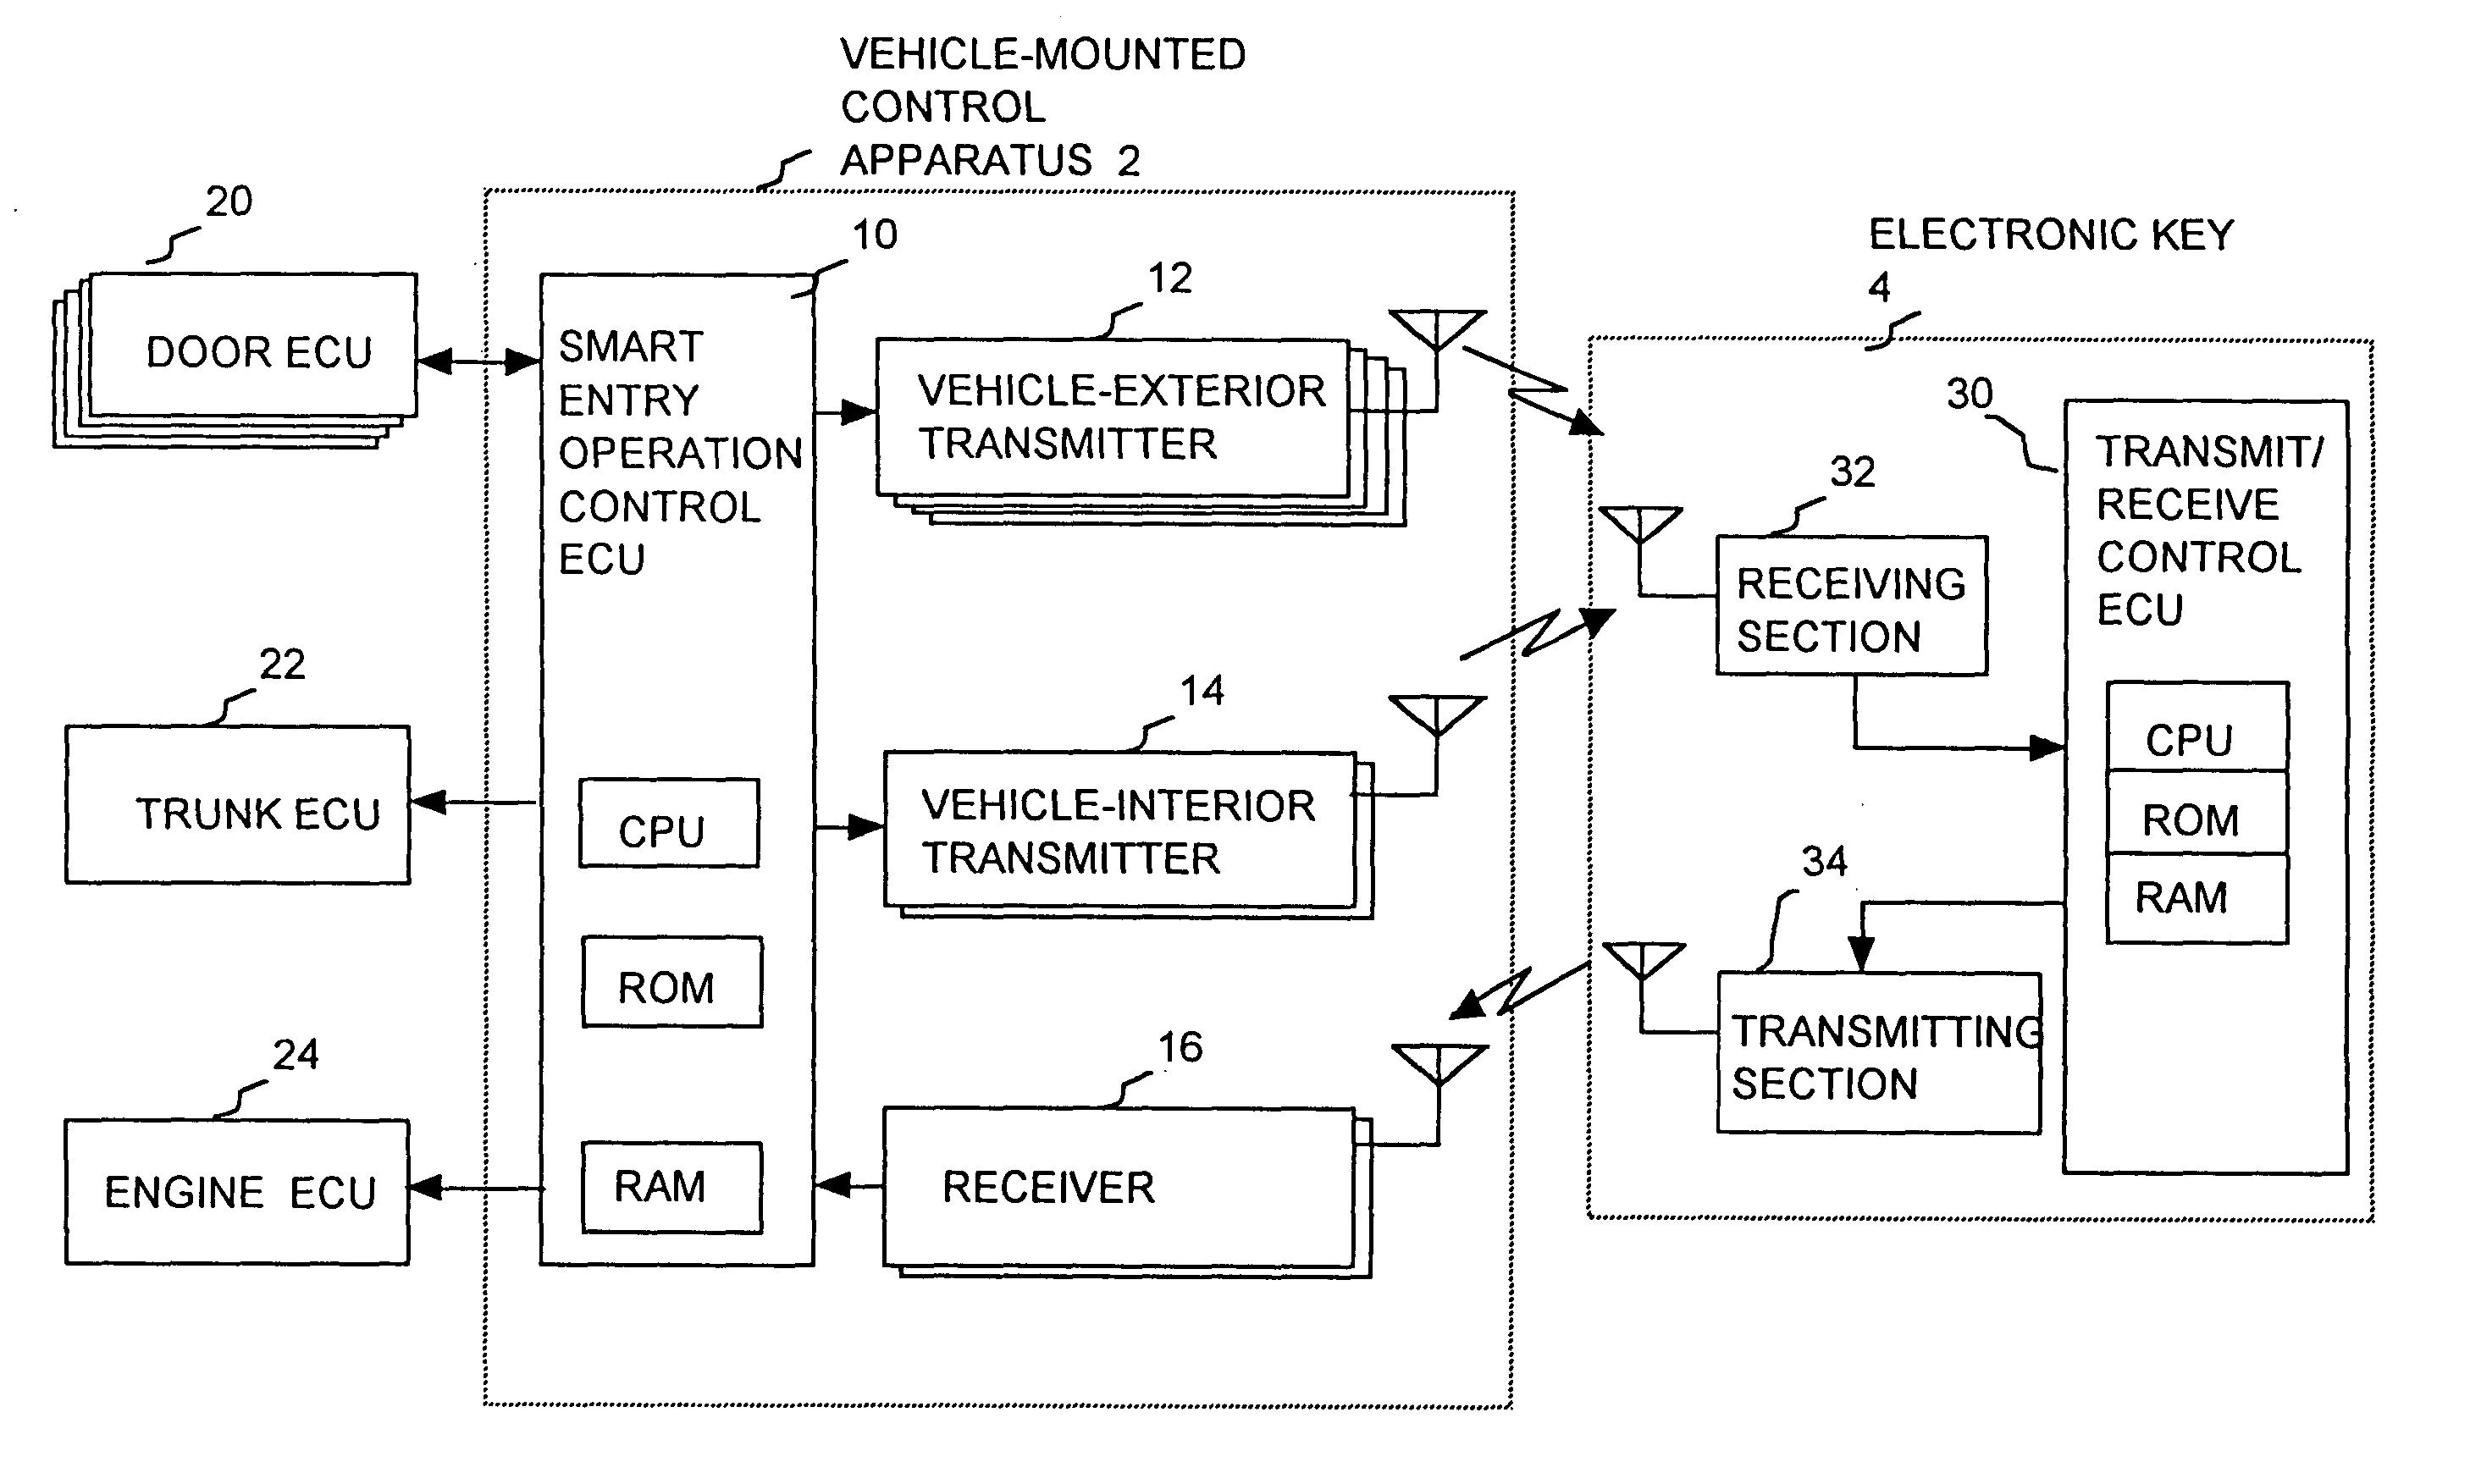 Remote control system for controlling a vehicle with priority of control access being assigned to the most recent user of the vehicle